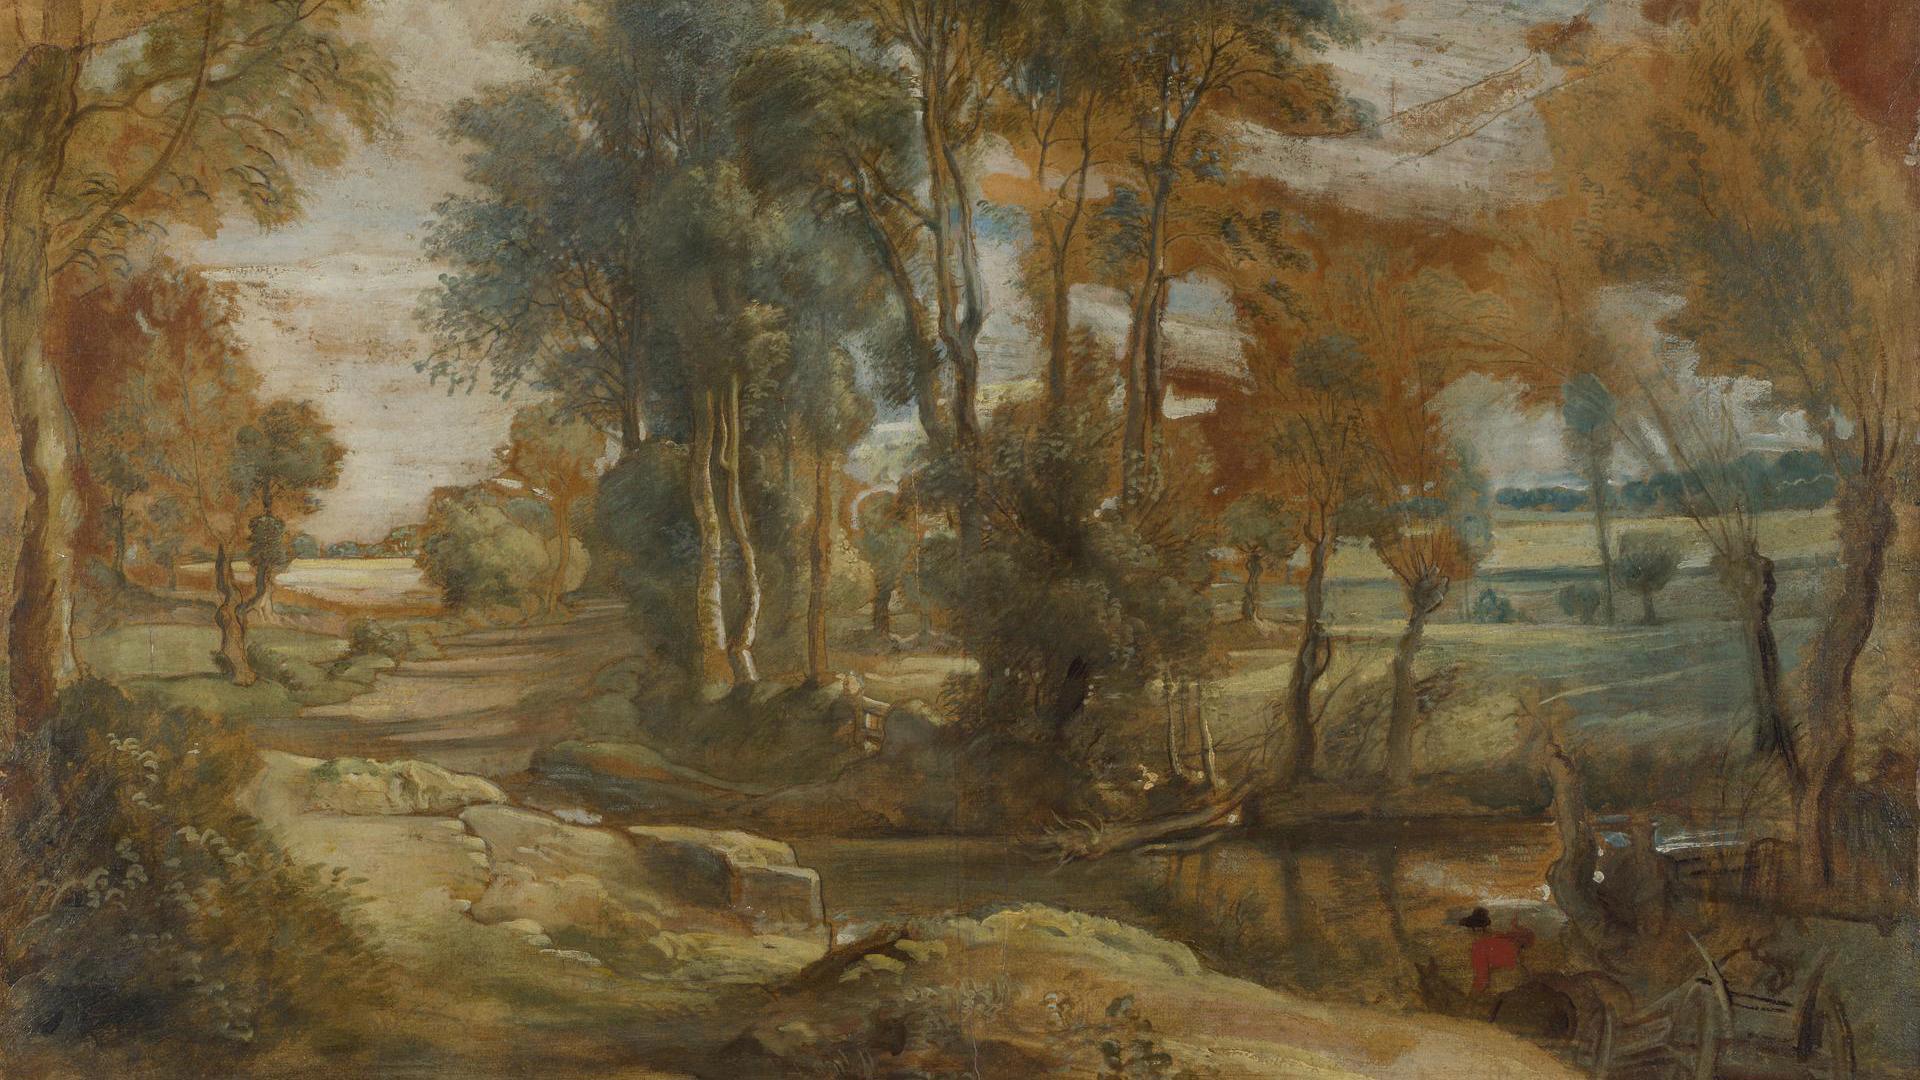 A Wagon fording a Stream by Peter Paul Rubens